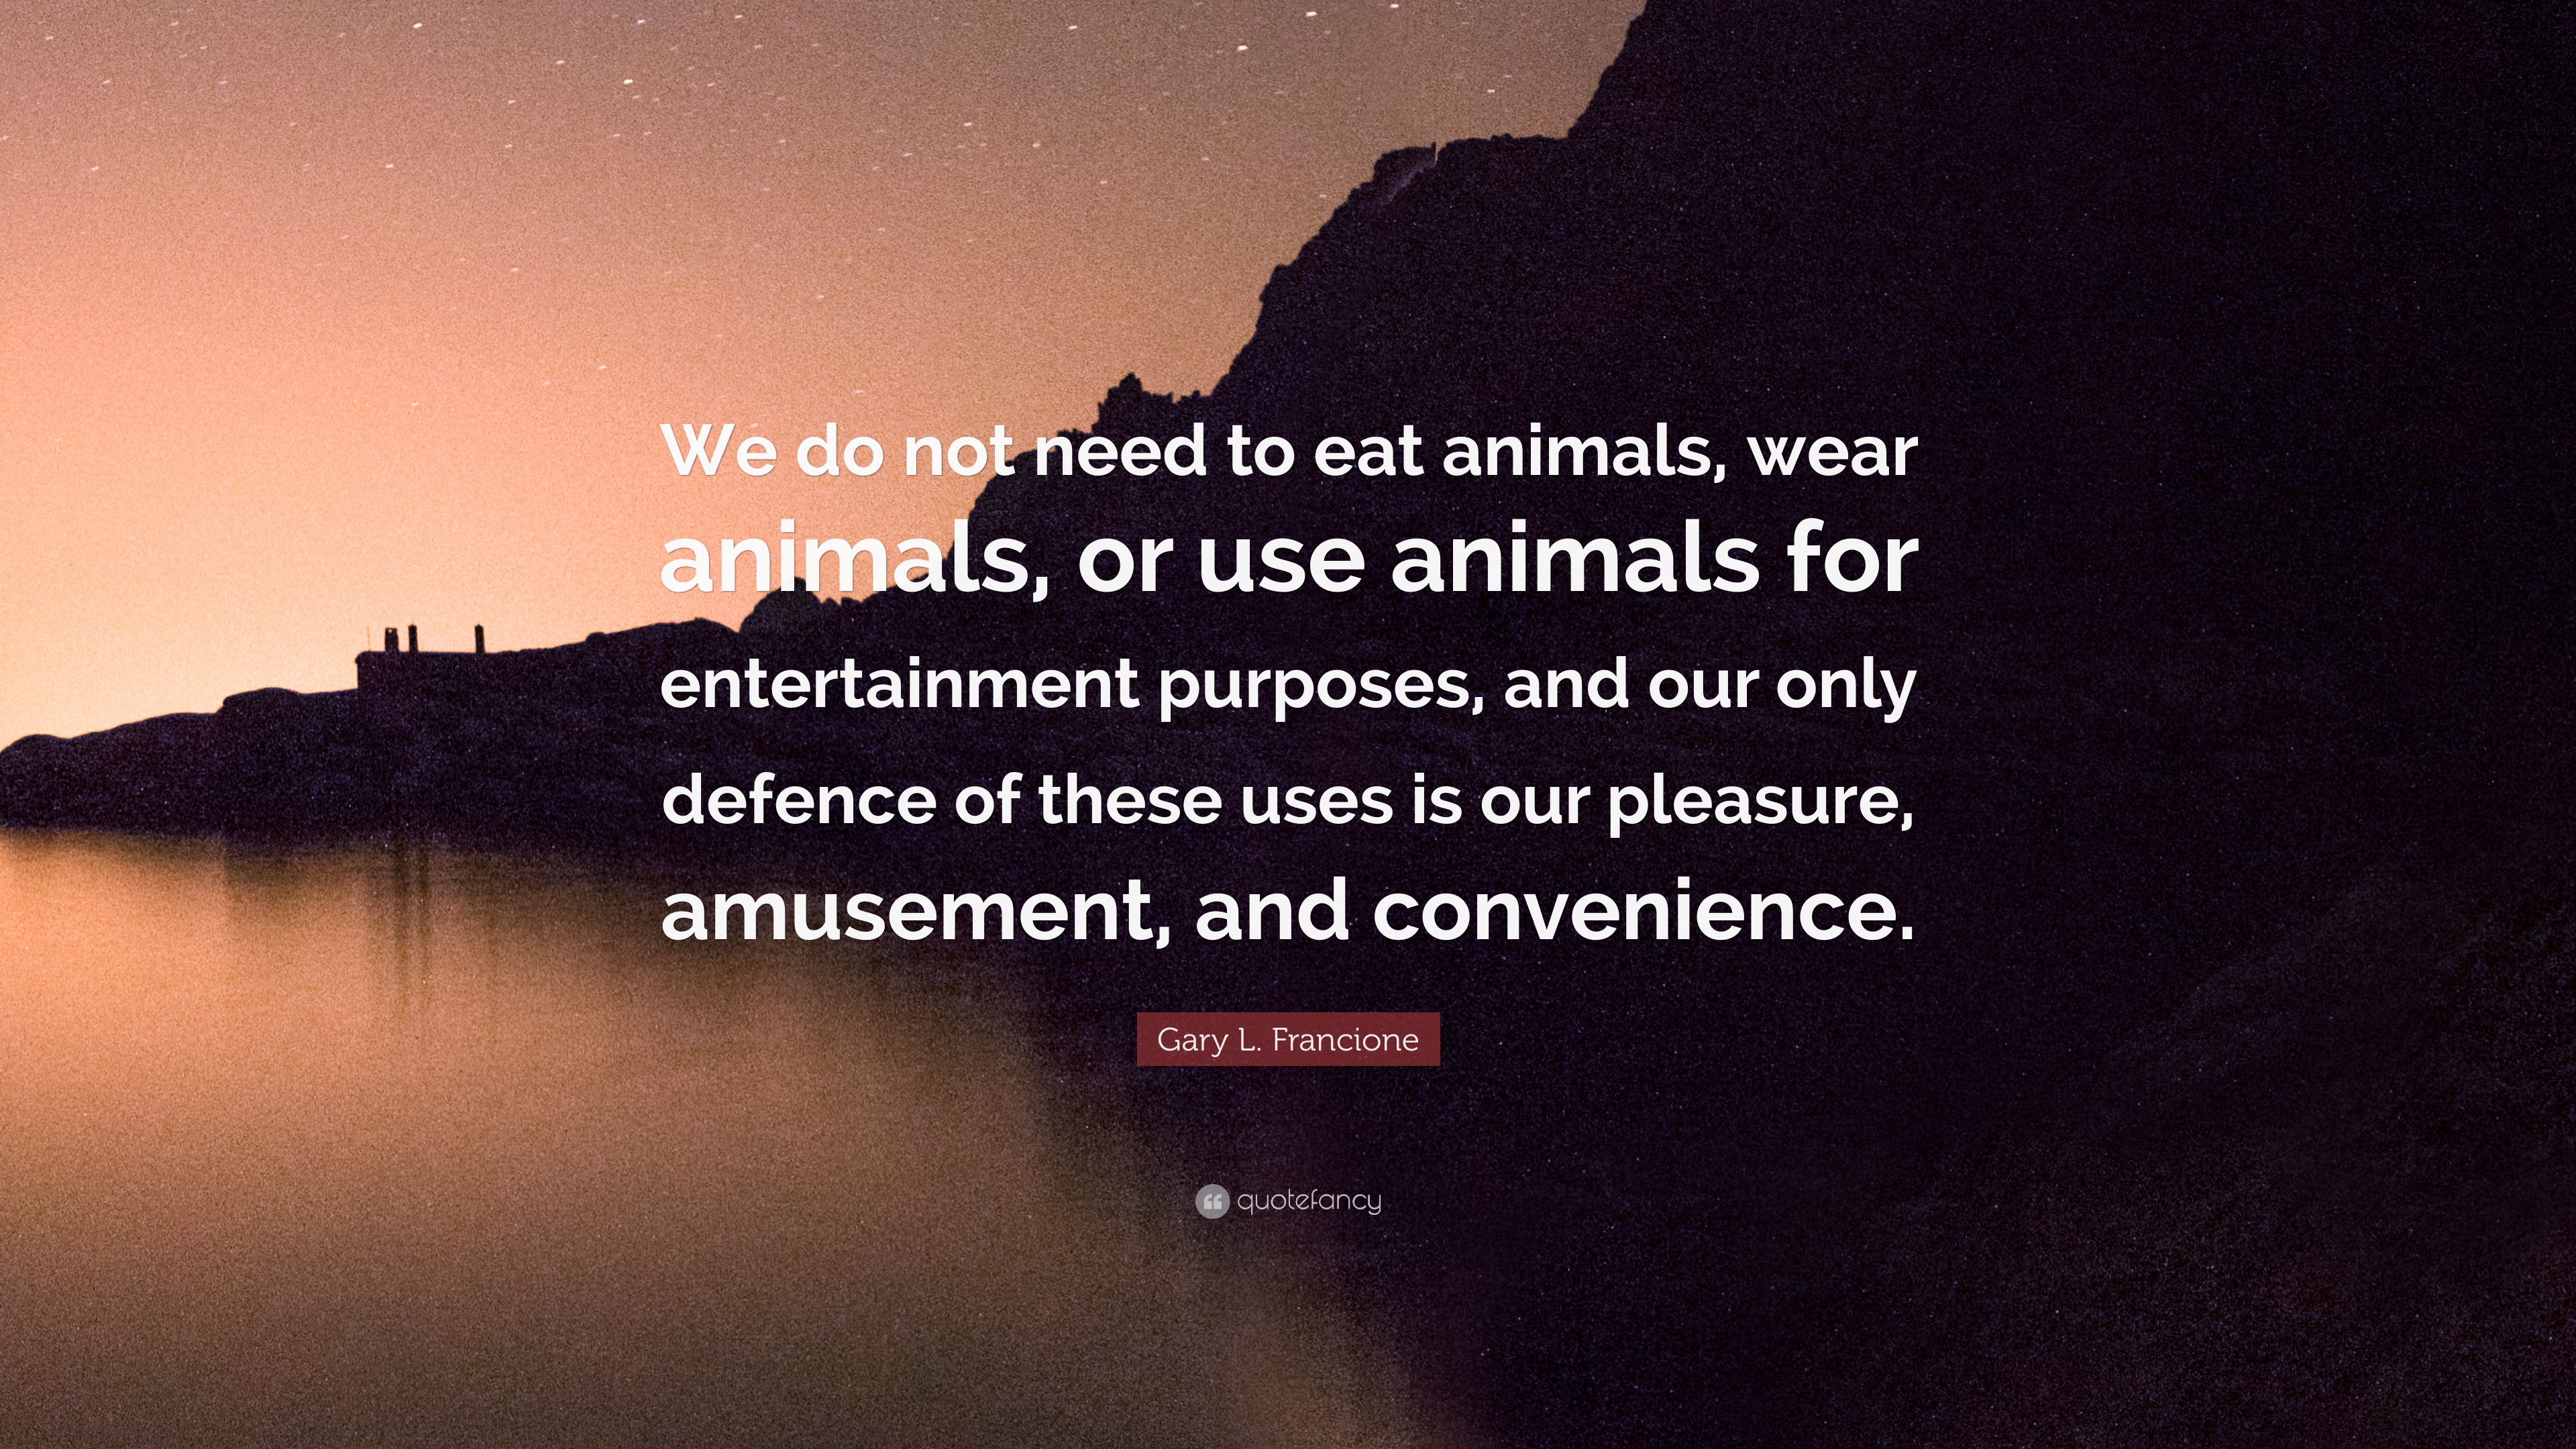 Gary L. Francione Quote: “We do not need to eat animals, wear animals, or  use animals for entertainment purposes, and our only defence of these us...”